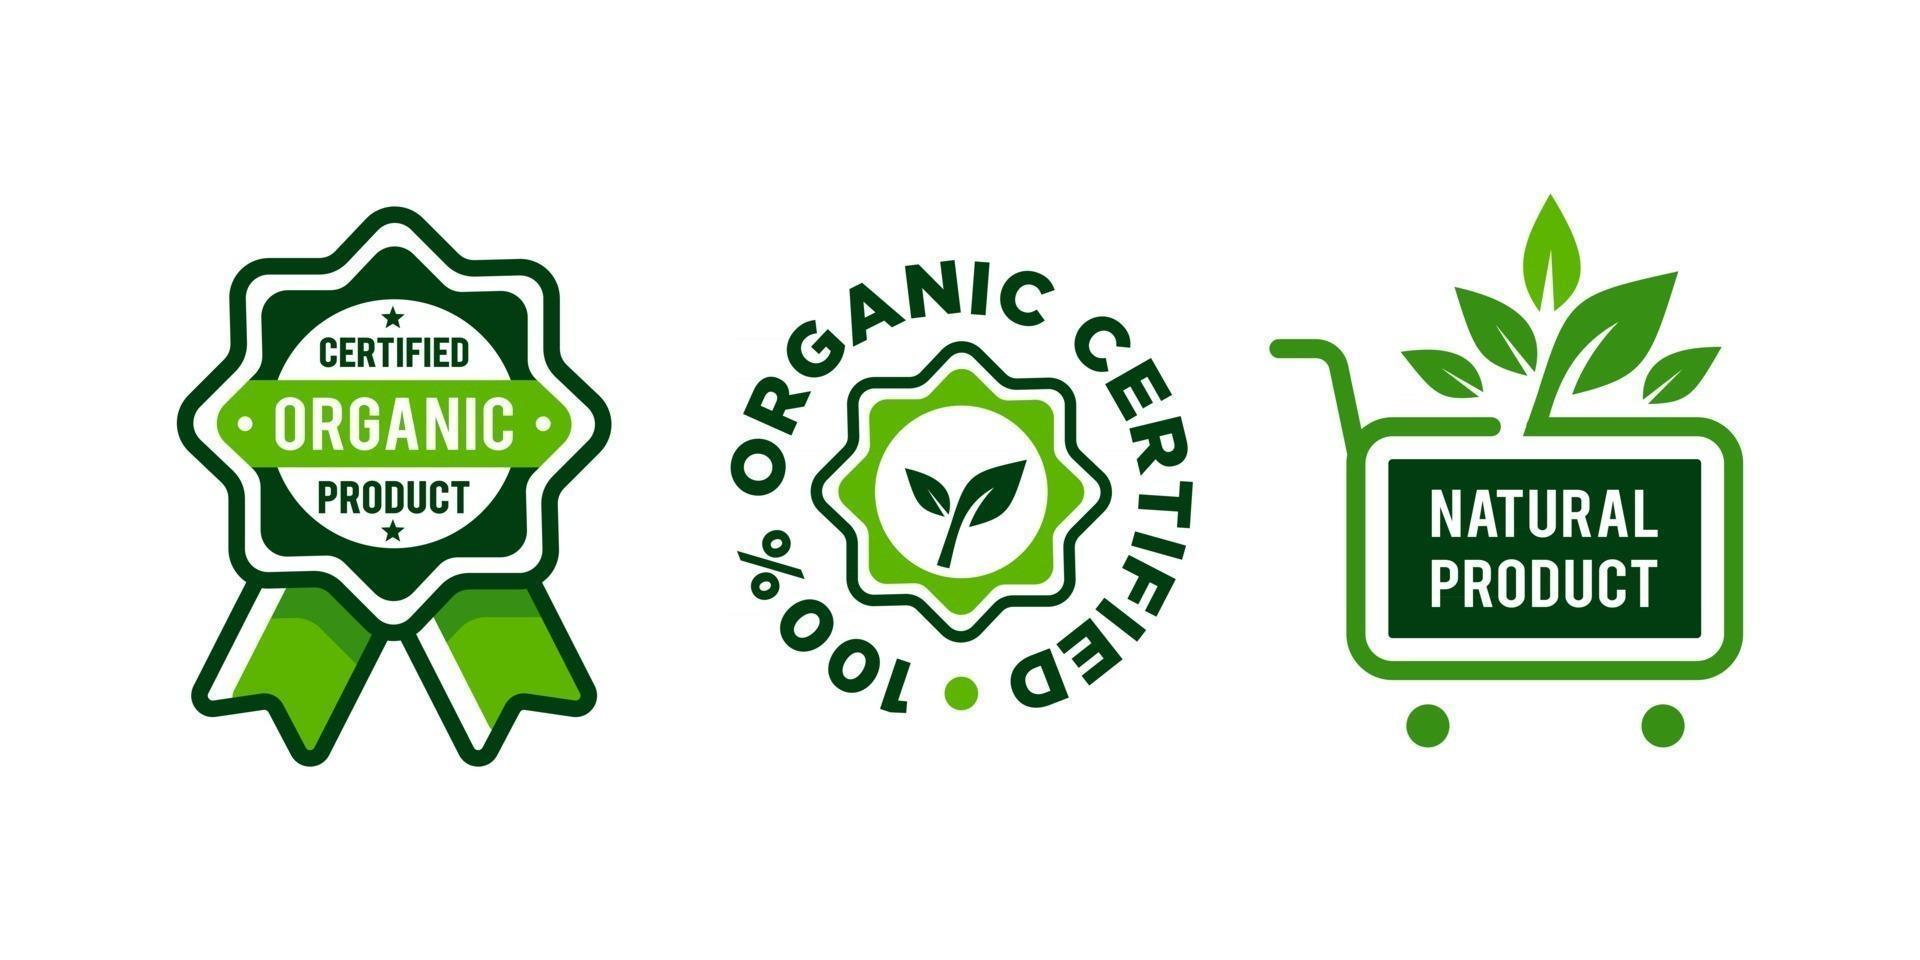 organic badge vector. certified organic Set of labels and stickers for green organic food and drink, and natural product. Vector illustration concepts for web design, packaging design